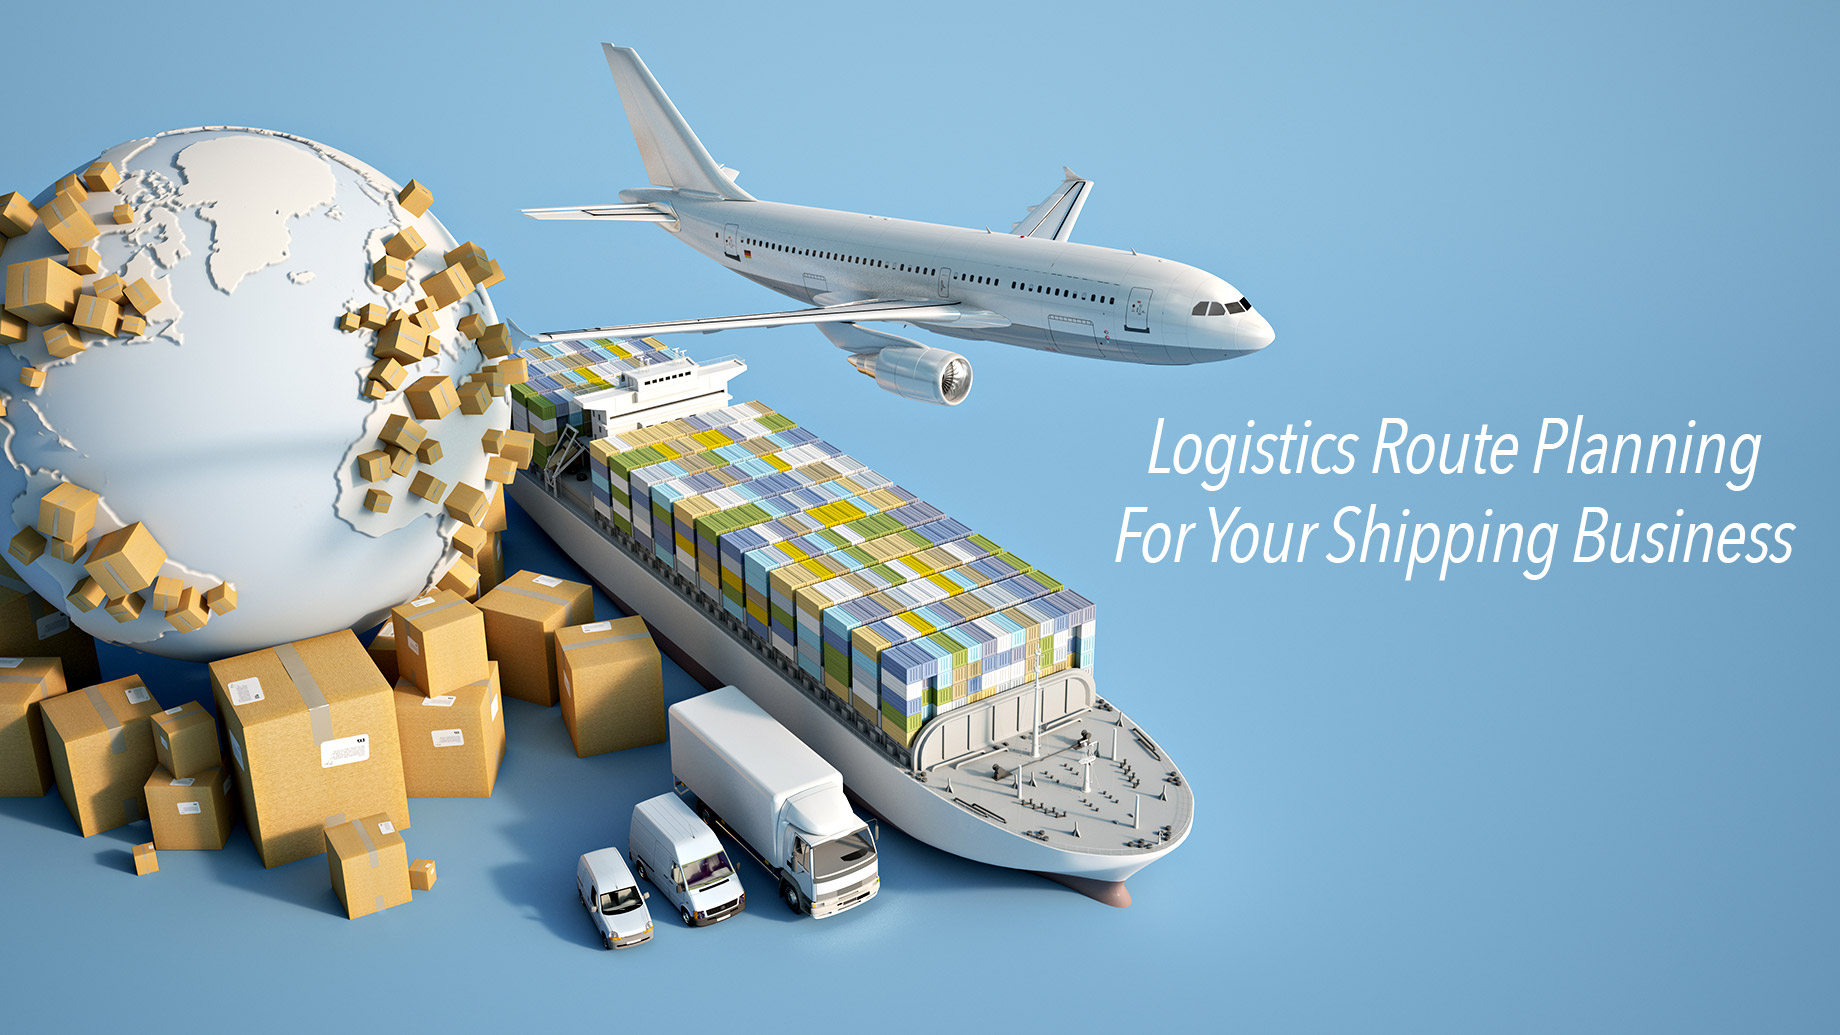 Roles and Advantages of Logistics Route Planning for Your Shipping Business